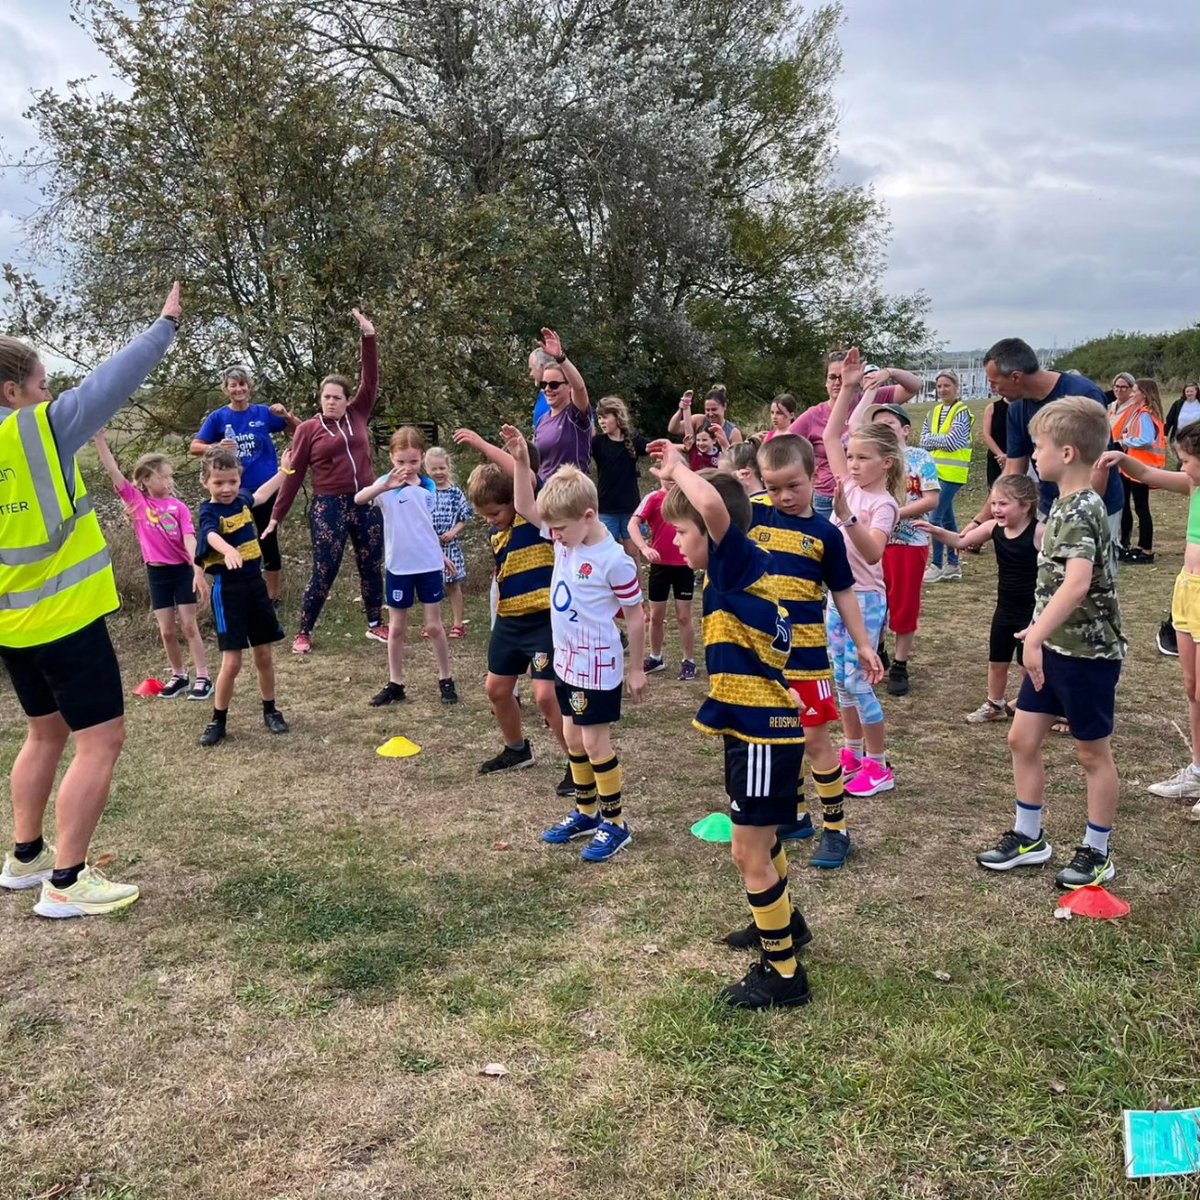 Event Number 7️⃣0️⃣ - 16/09/23

Shoutout to the superstars juniors who joined us for event 70 this morning. It was a great morning for our superstar athletes! 🏃‍♀️ 🏃‍♂️

🏆 1️⃣9️⃣ Finishers! 
🦺 1️⃣9️⃣ High Viz Hero Volunteers! 
🏅 1️⃣ Milestone!
🎂 1️⃣ Birthday!

#lovejuniorparkrun #parkrun